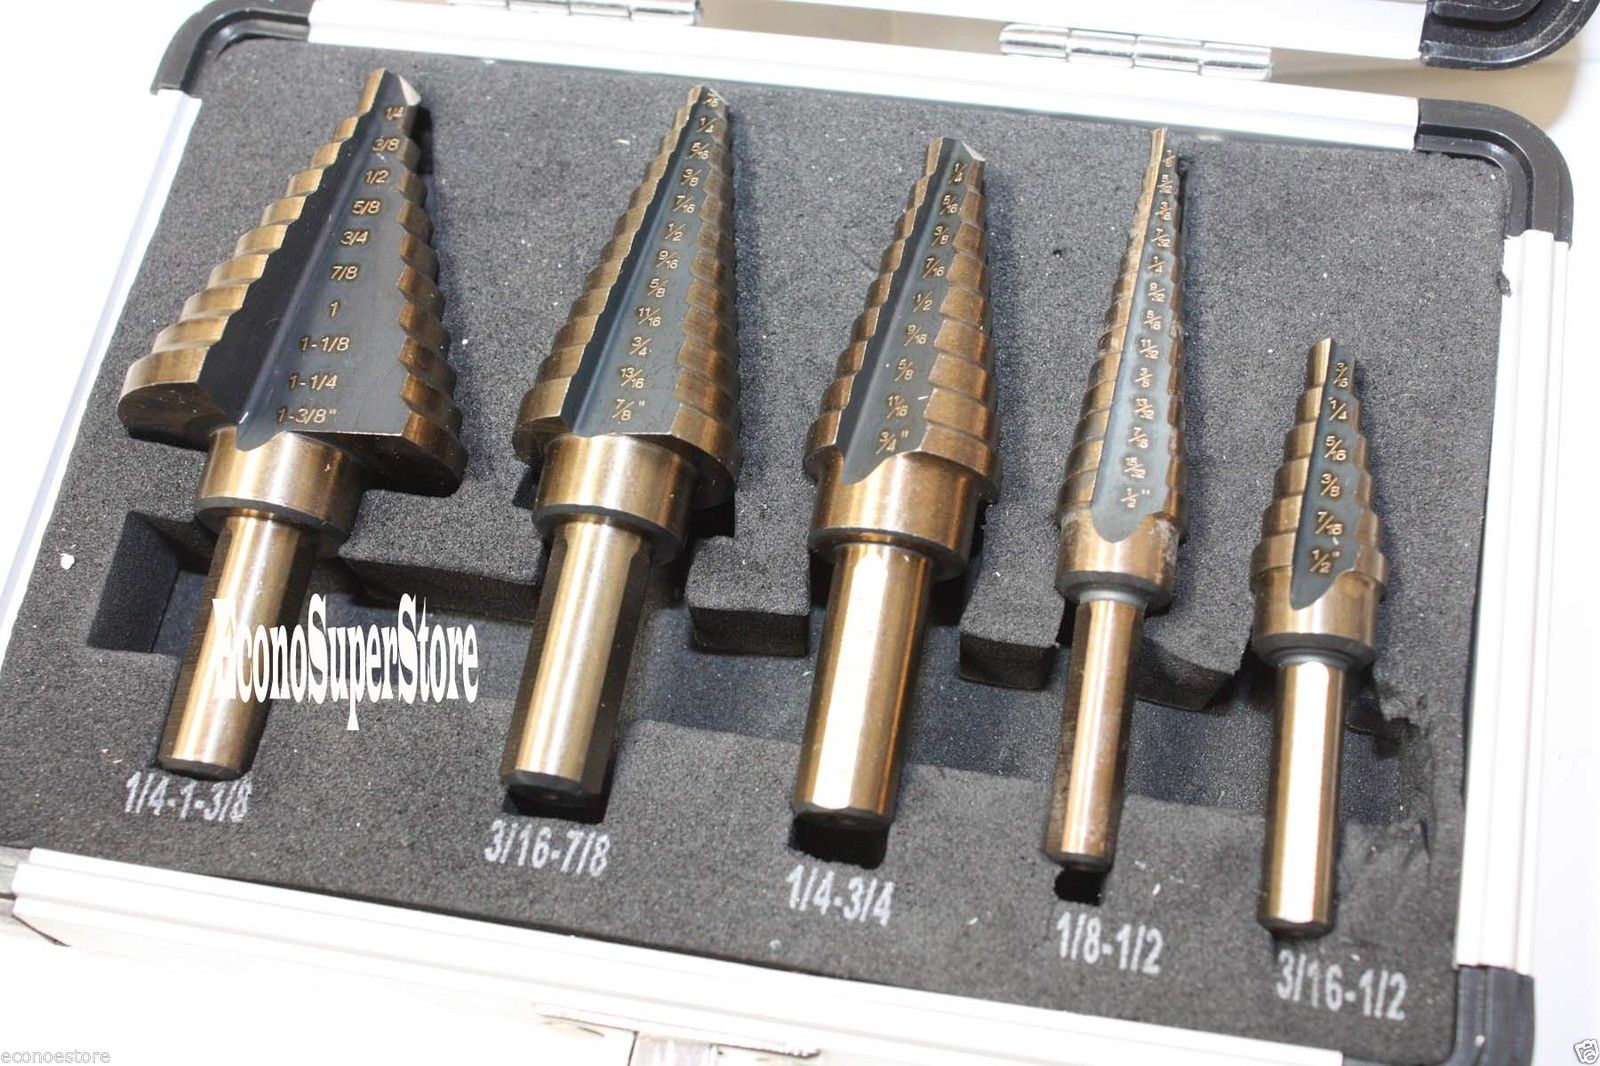 Drilling holes in plastic stainless steel and many other types of sheet metal so that they power copper SKEMiDEX---5PCS METRIC HSS COBALT MULTIPLE HOLE 50 MM Sizes STEP DRILL BIT SET w/ Case 